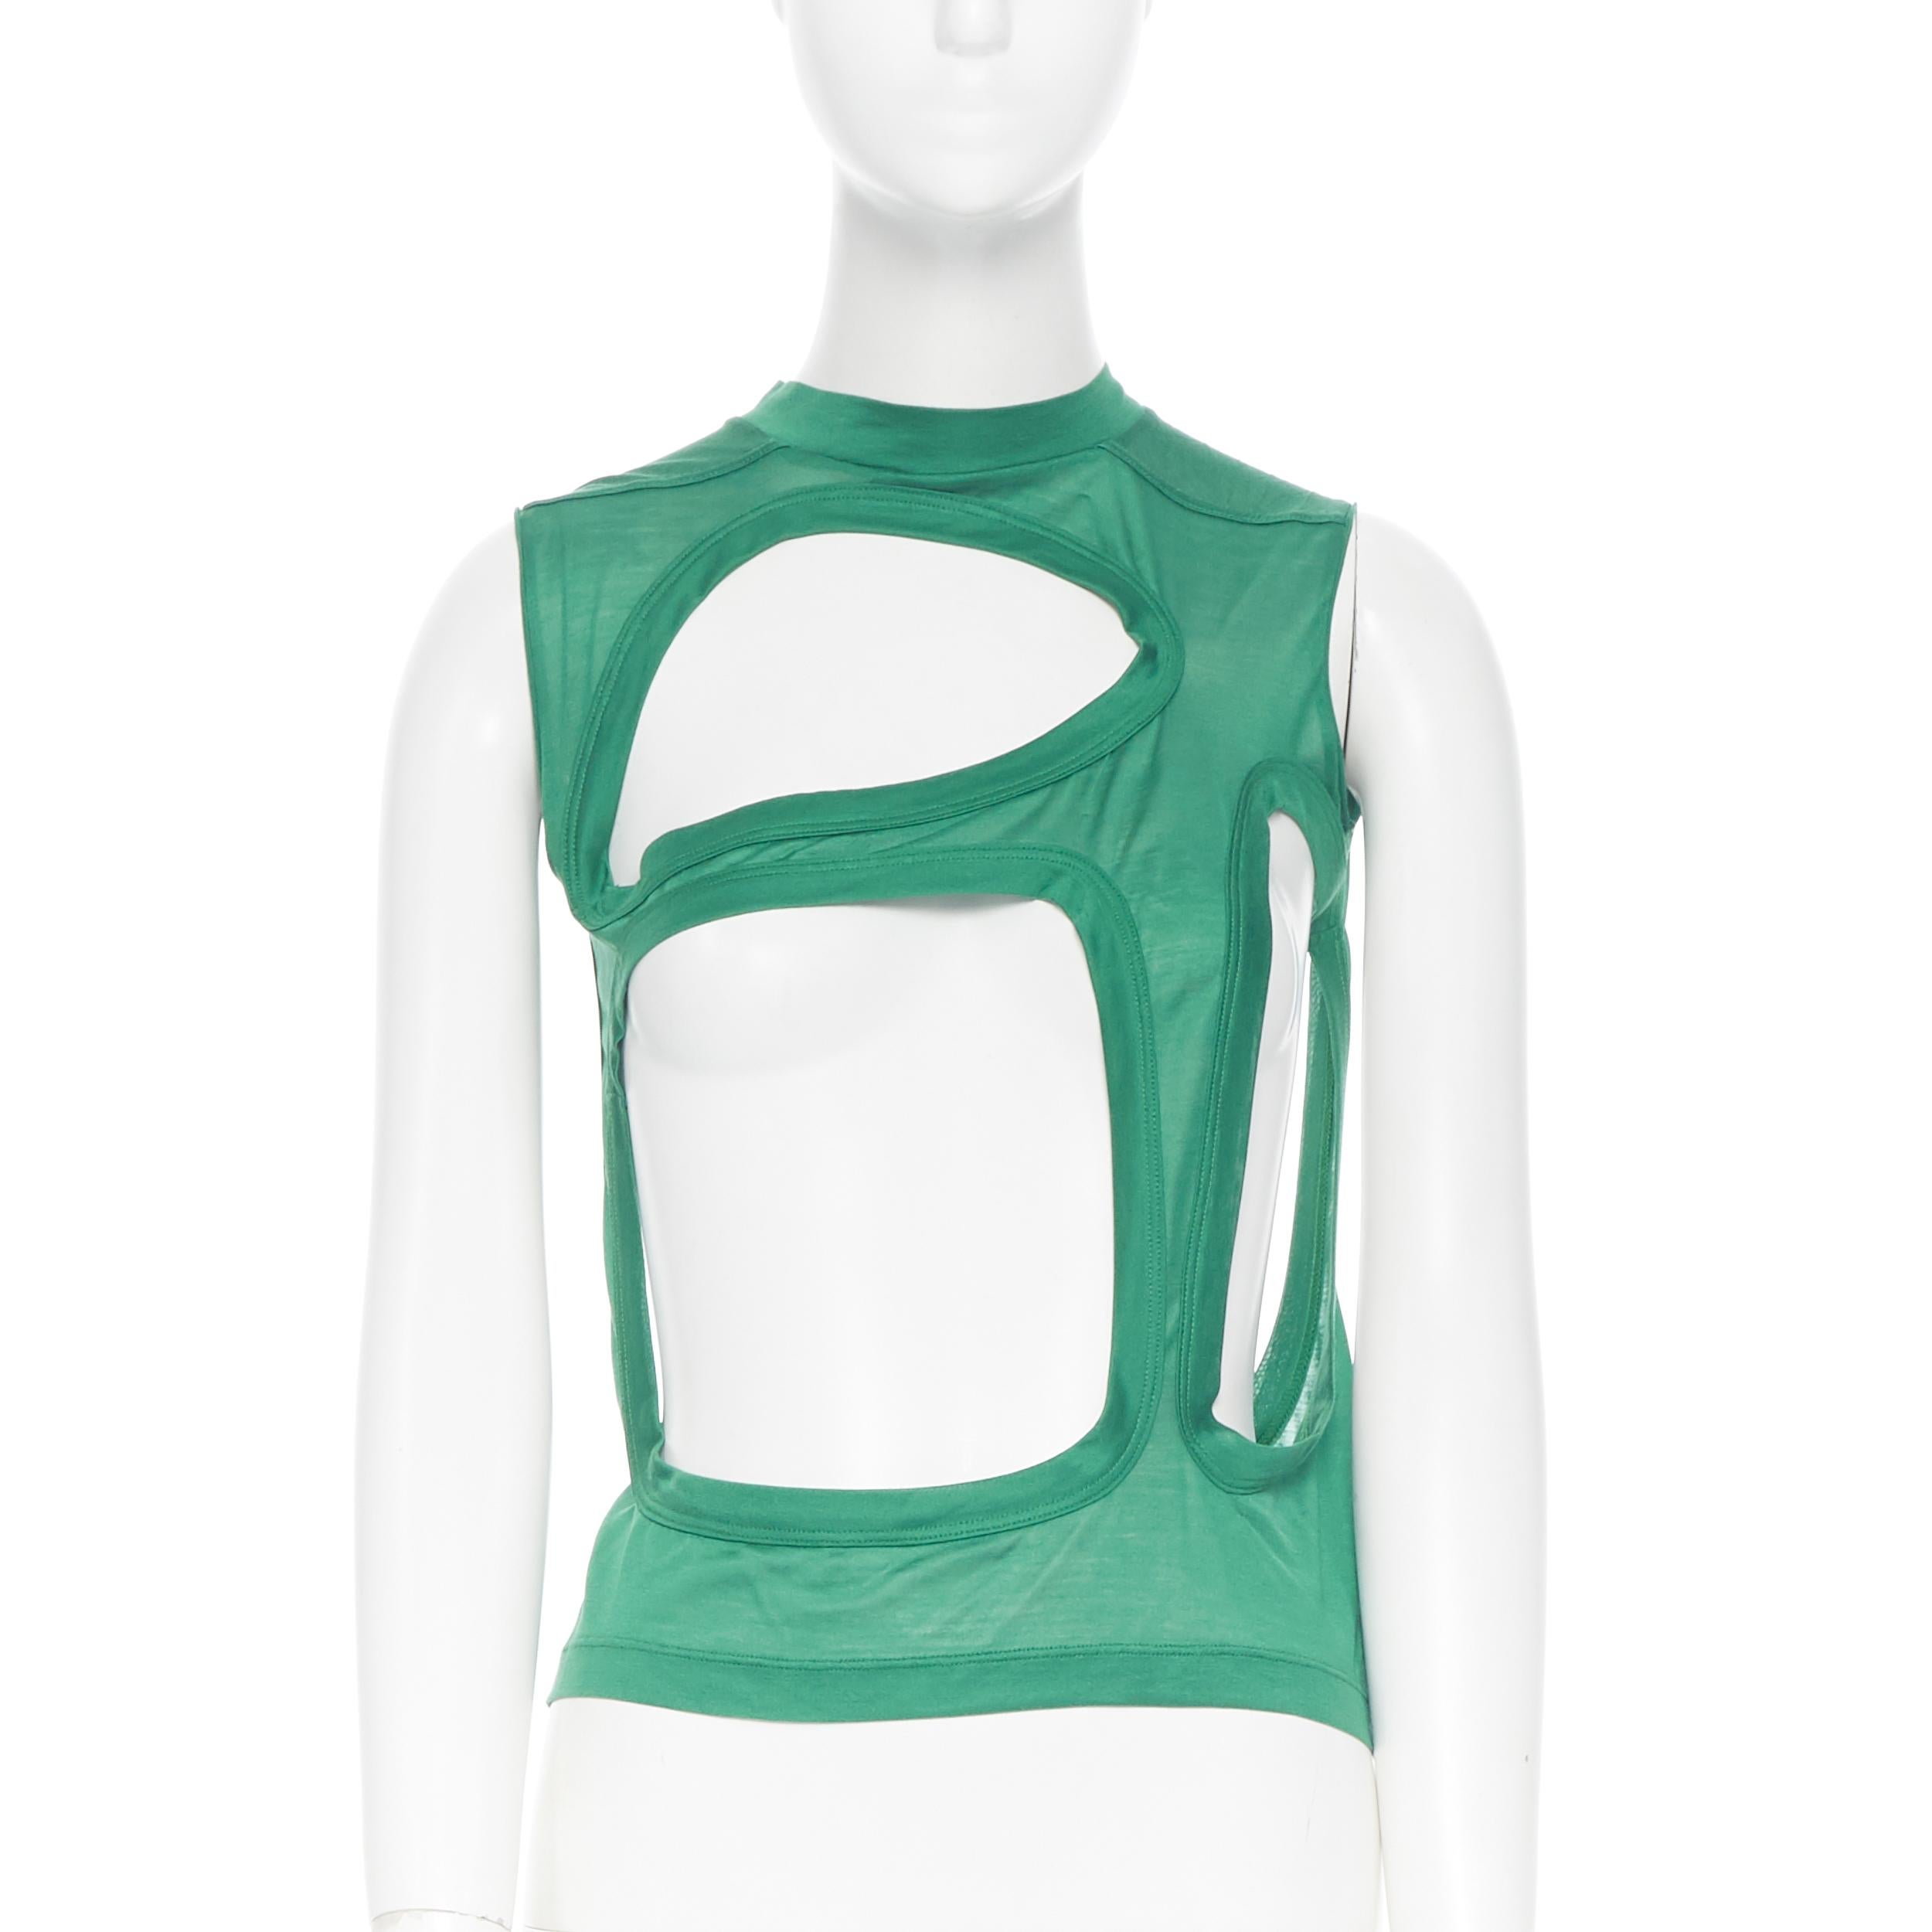 new RICK OWENS SS18 Dirt Membrane green cotton holey cut out tunic dress IT40 S
Brand: Rick Owens
Designer: Rick Owens
Collection: Spring Summer 2018
Model Name / Style: Membrane dress
Material: Cotton
Color: Green
Pattern: Solid
Extra Detail: